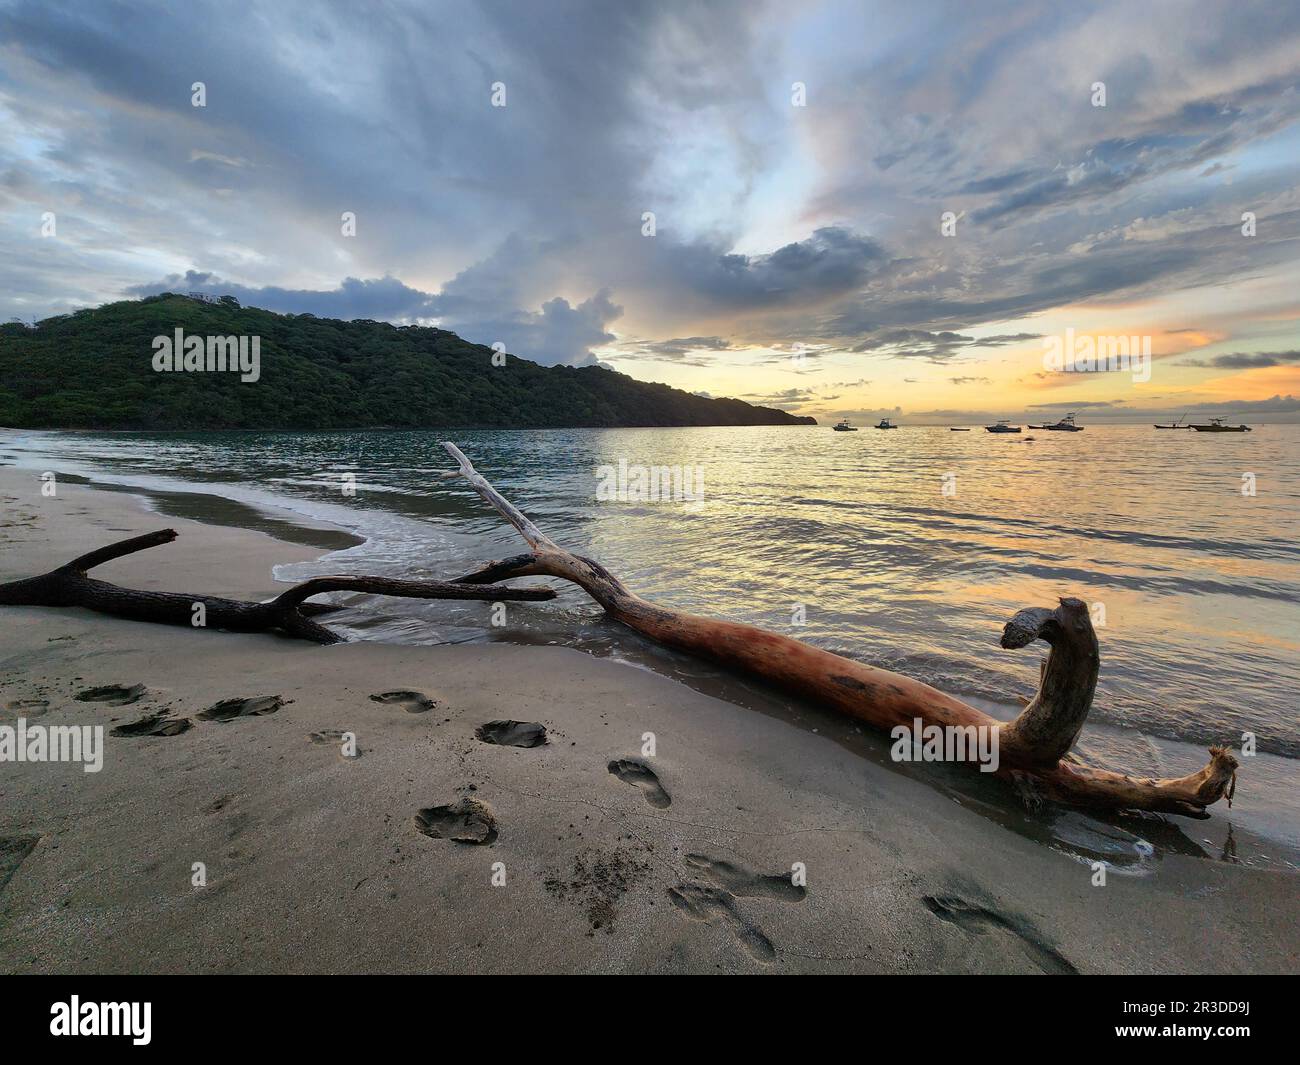 Piece of wood on tropical beach with dramatic sunset background Stock Photo